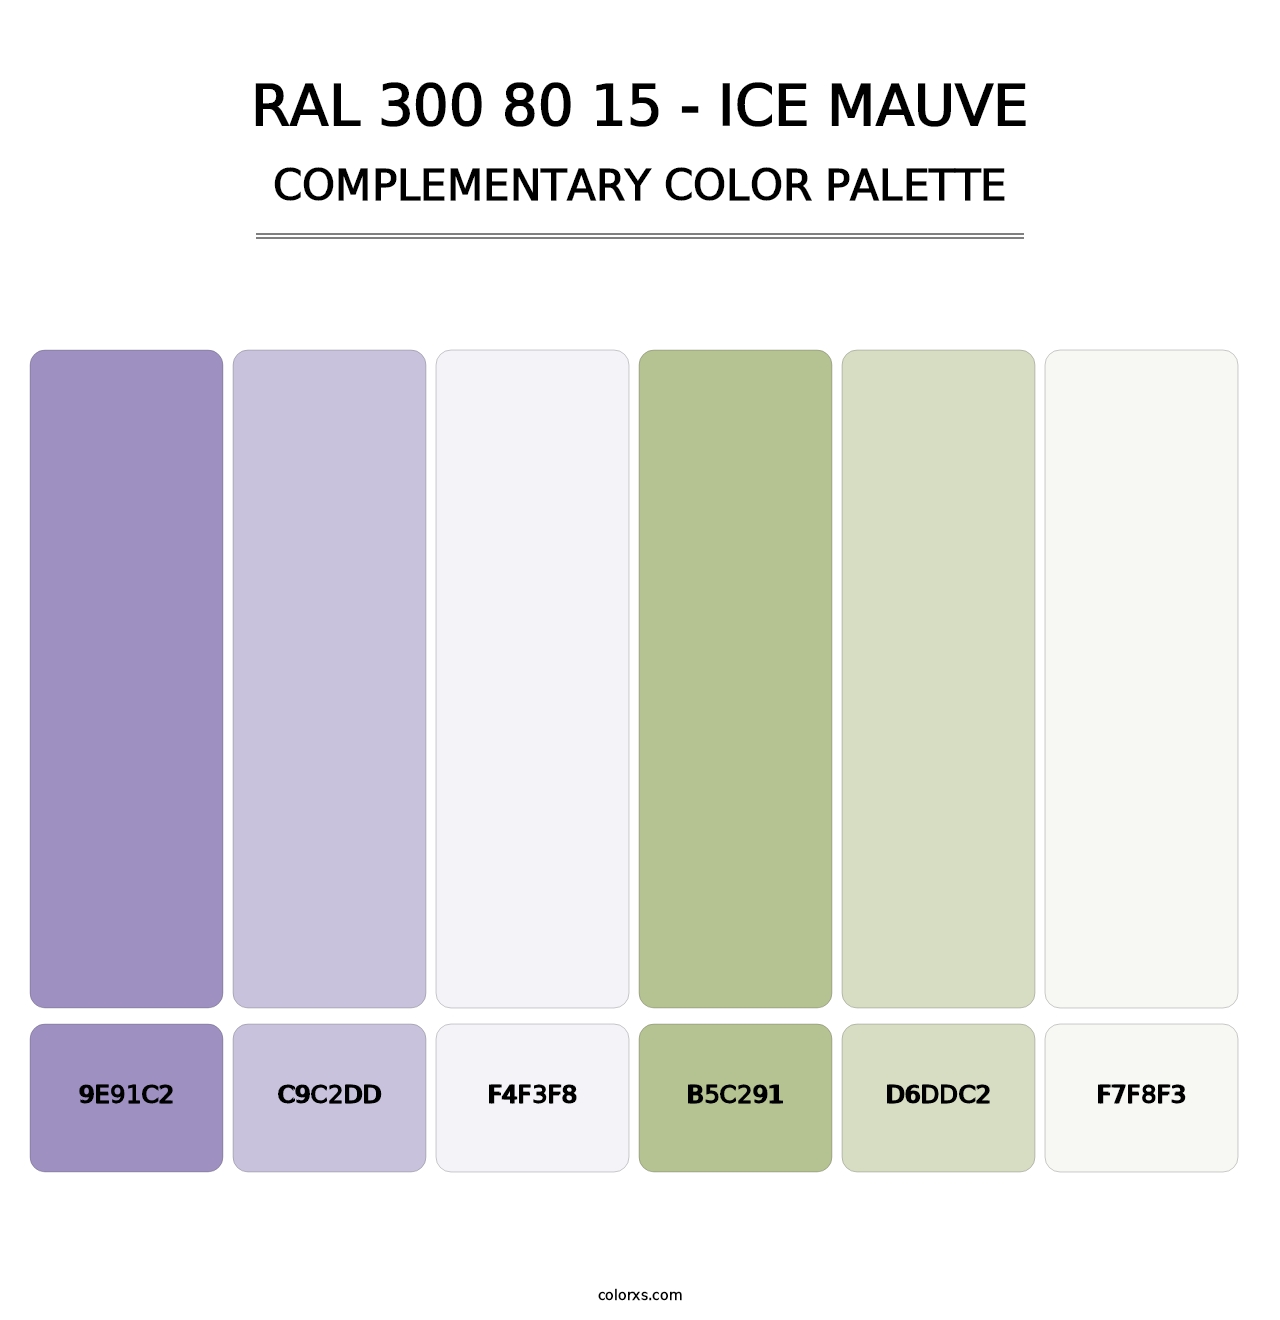 RAL 300 80 15 - Ice Mauve - Complementary Color Palette